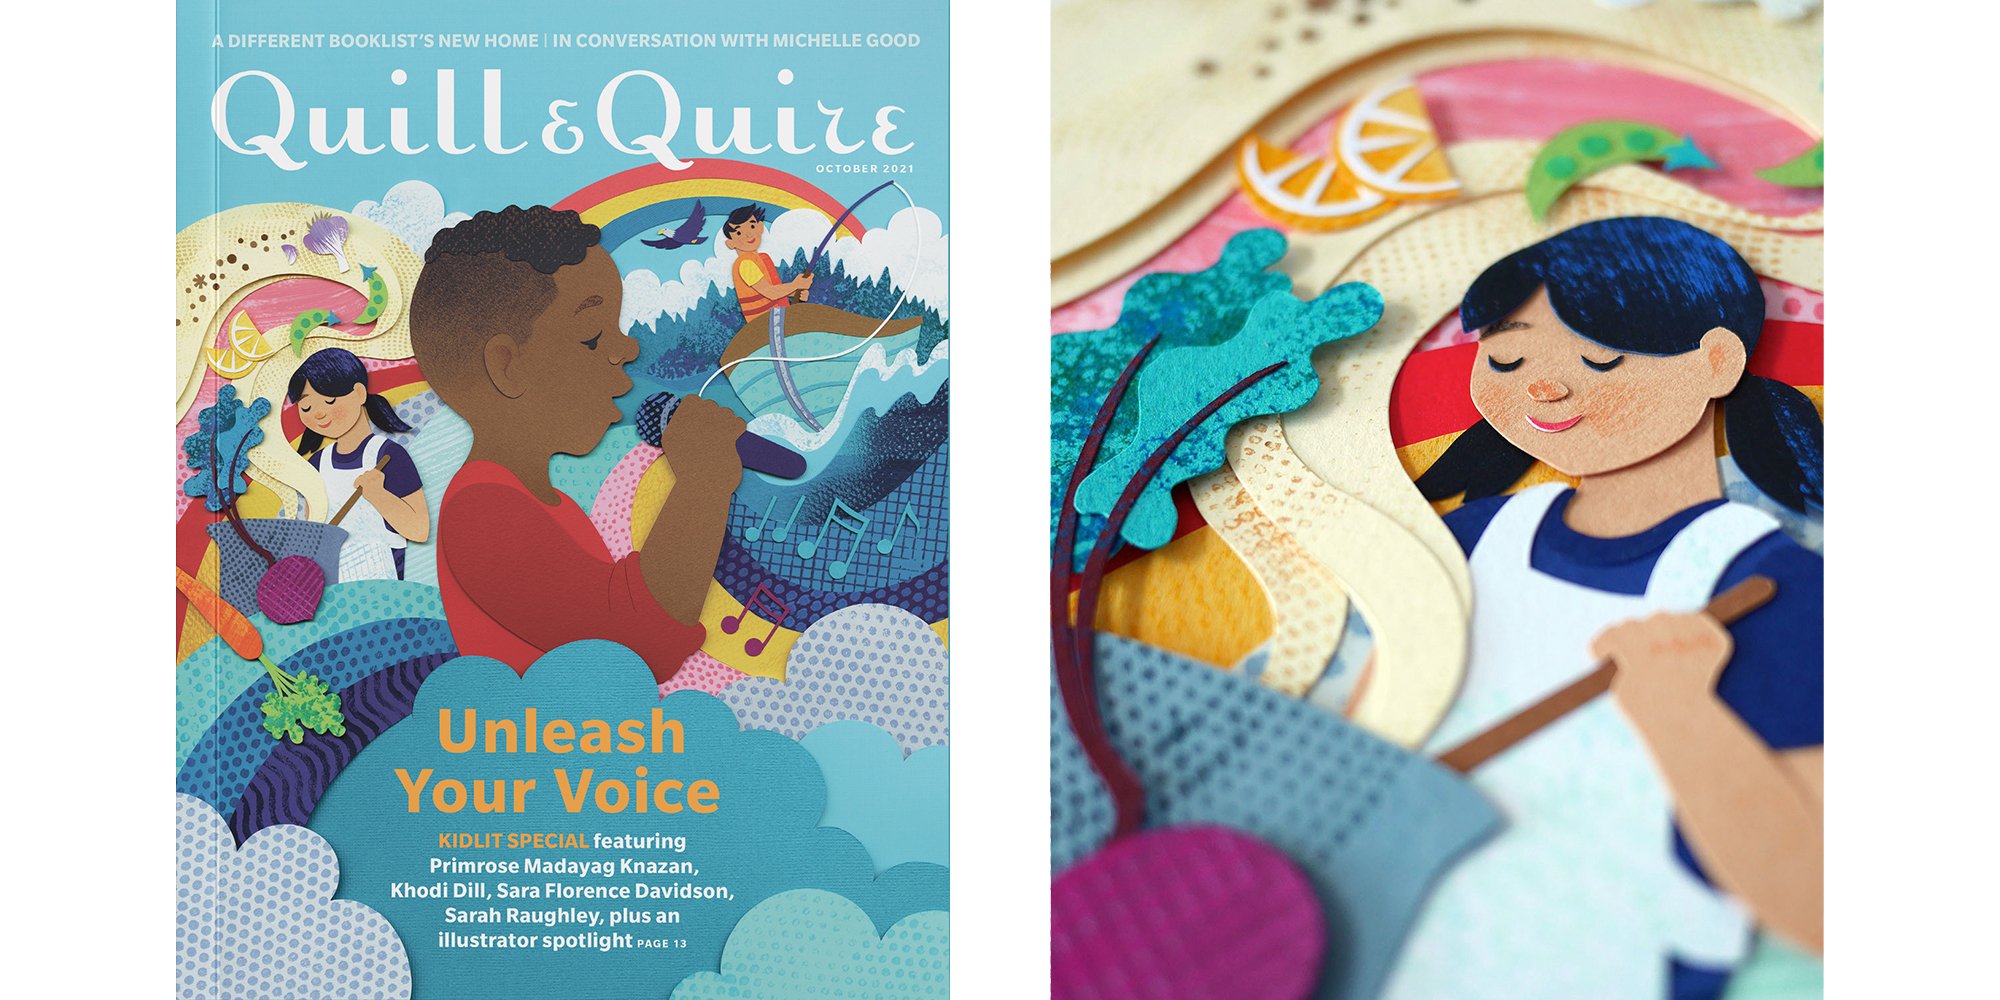 The October cover of Quill & Quire; a detailed image of the cover showing a child stirring a pot.